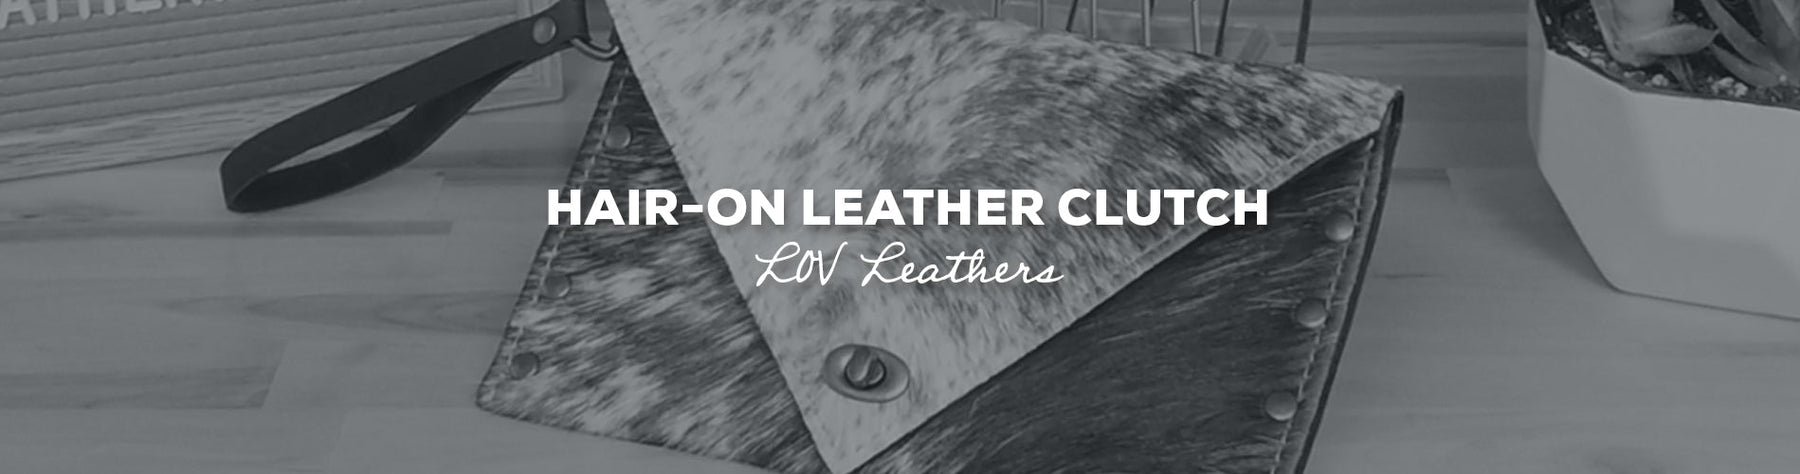 Gift Idea: Hair-On Leather Clutch with LOV Leathers